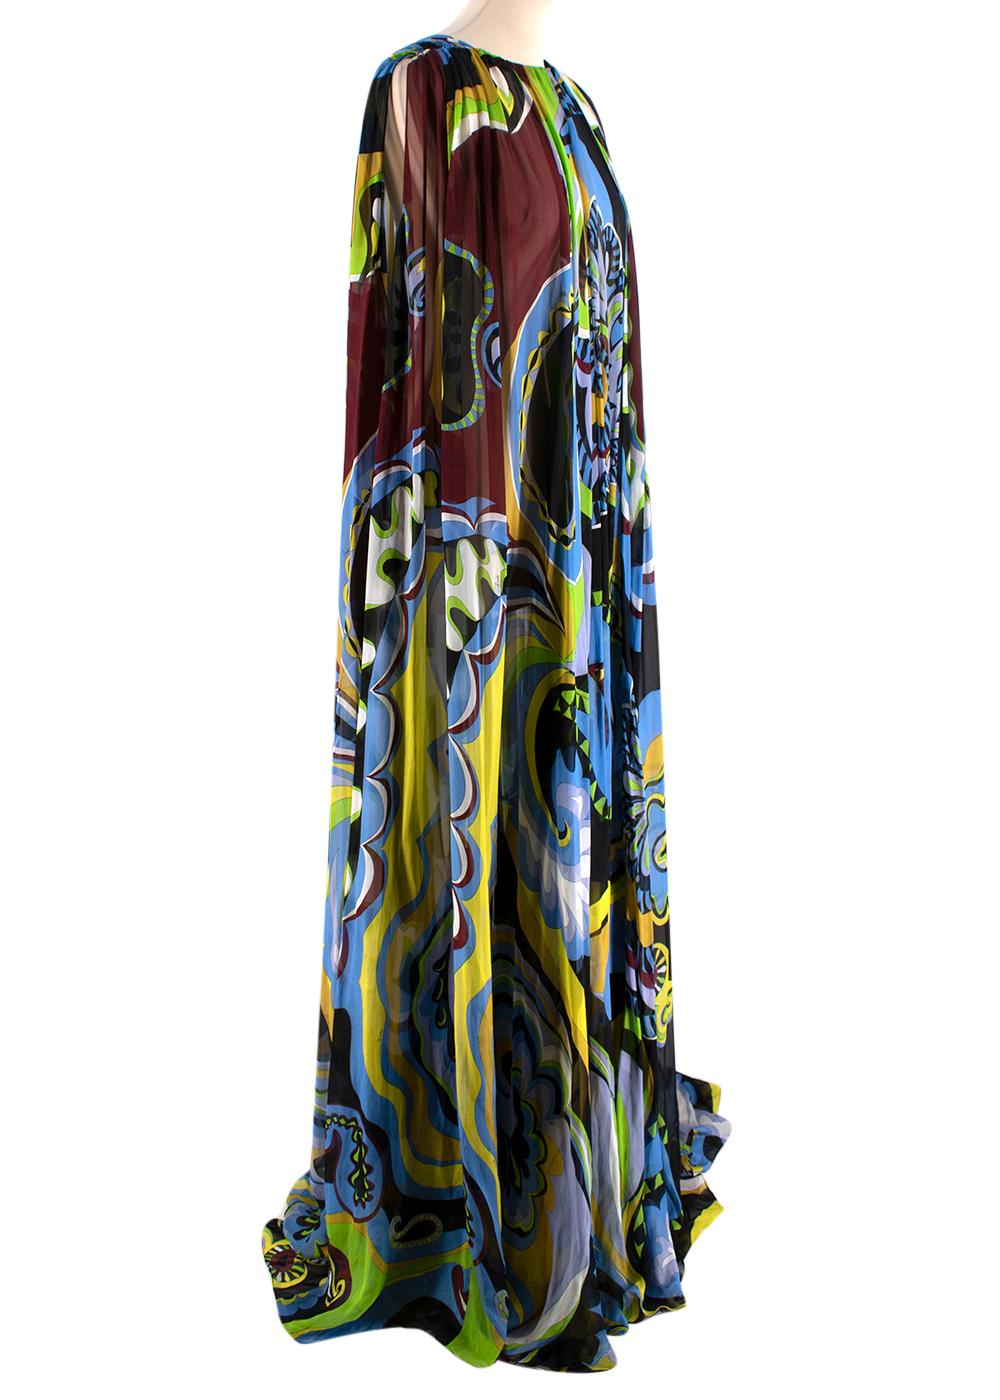 Emilio Pucci Blue Print Silk Long Dress

- Made of soft silk 
- Signature print 
- Gorgeous color combination 
- Lightweight flowy construction 
- Gathered at the shoulders 
- V shaped neckline 
- Cheerful elegant design 

Materials:
100% silk